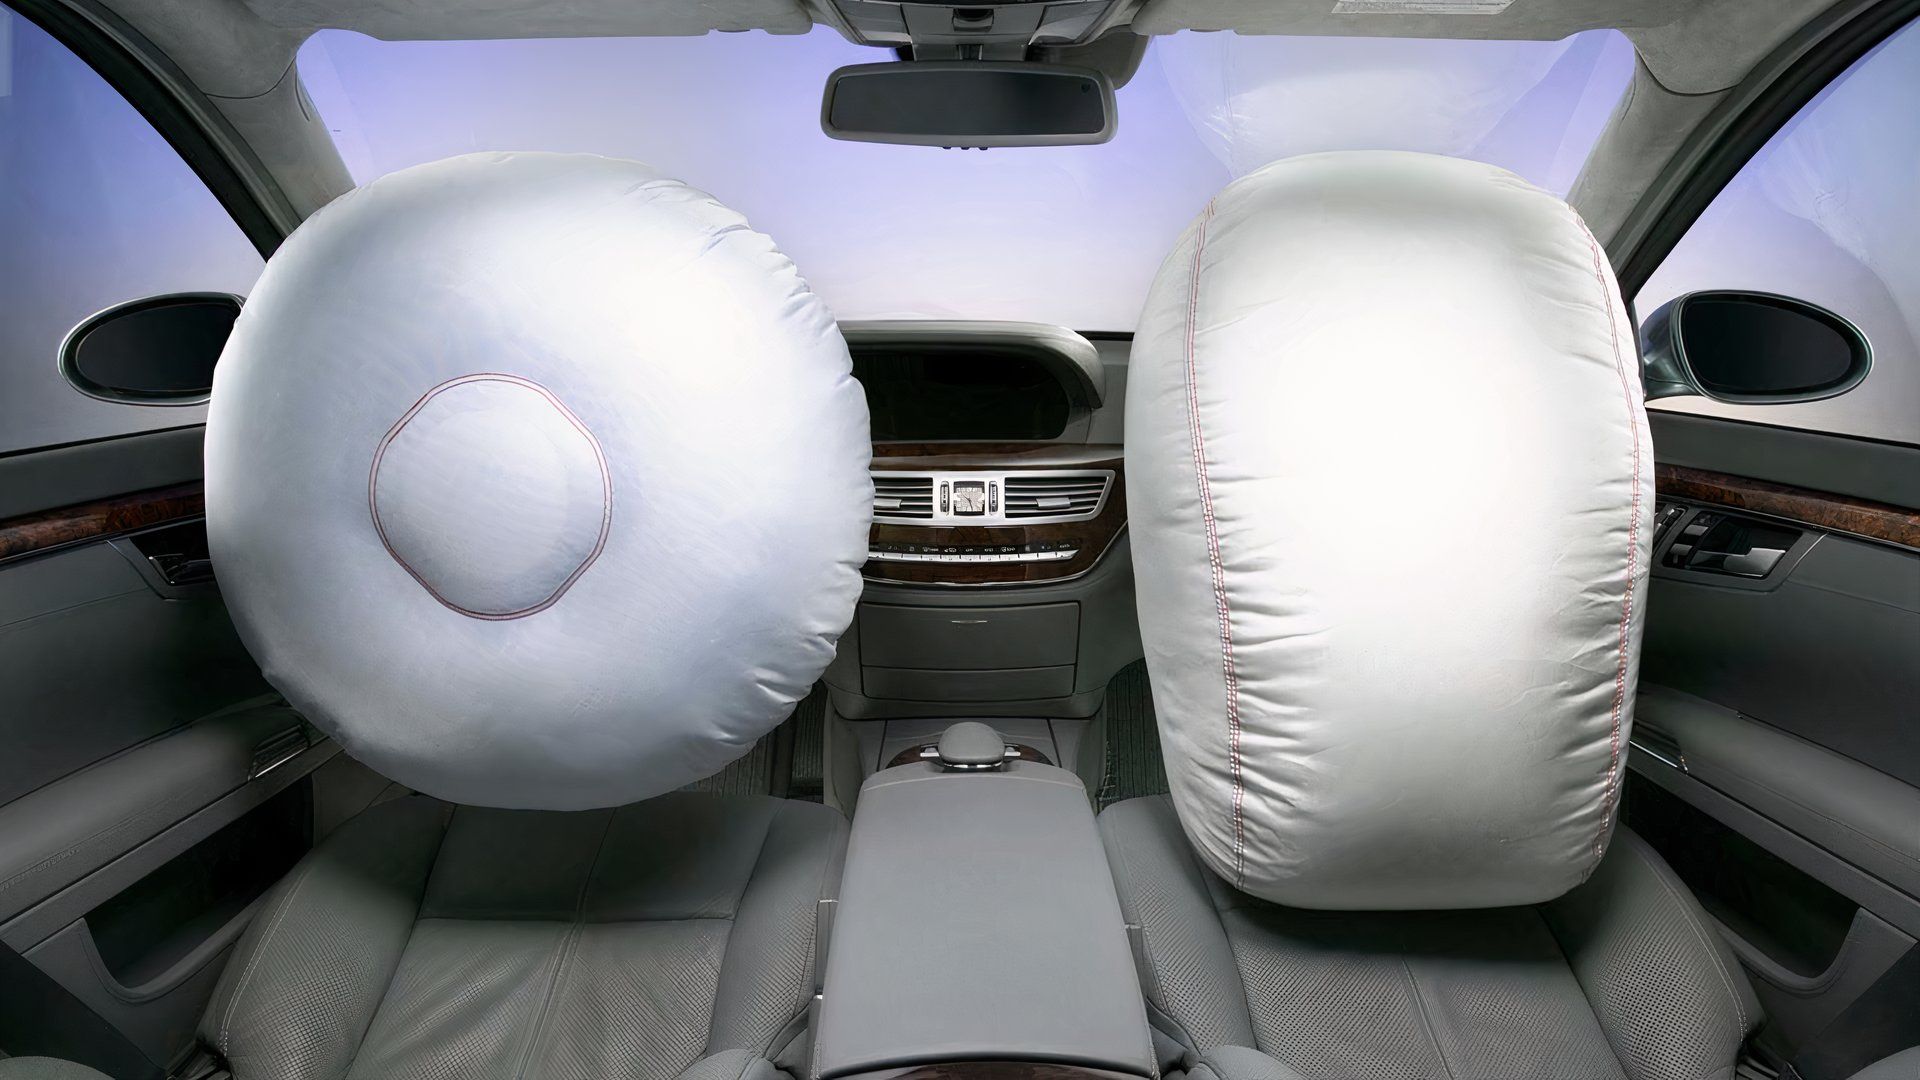 Mercedes-Benz Airbags System (Via Mercedes)